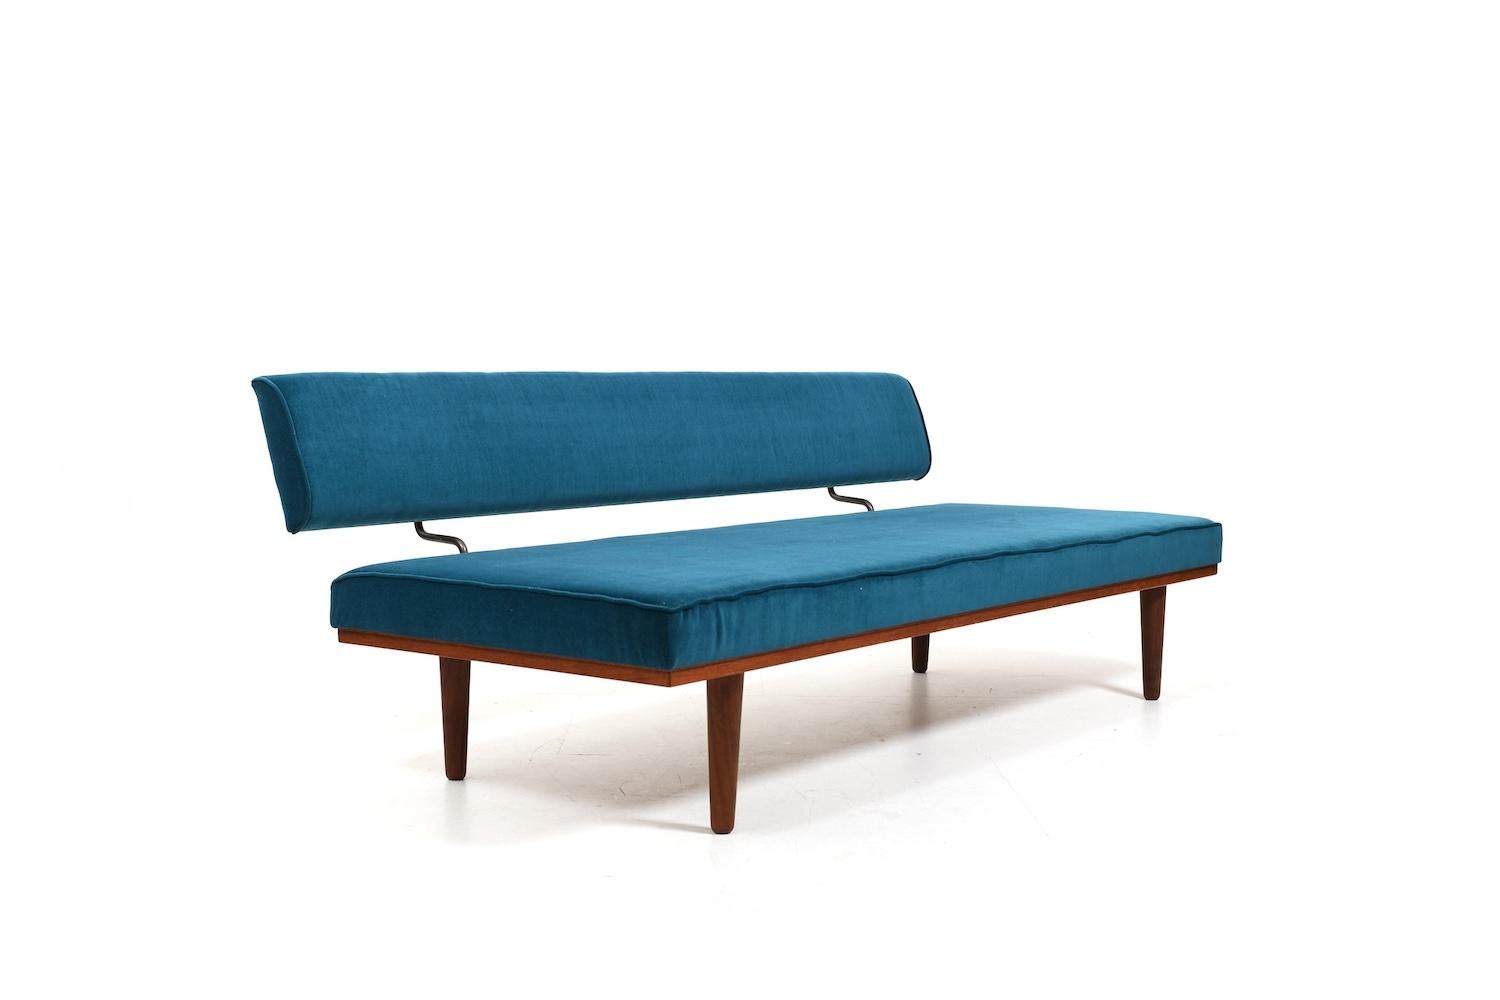 Daybed by Severin Hansen Jr. in teak. New upholstered with fine petrol colored velvet fabric. The backrest can be adjusted as a seat and daybed.. Model SH7, designed in 1957. Produced late 50s. Haslev Møbelsnedkeri Denmark.
-
W. 190 cm / D. 72 cm -